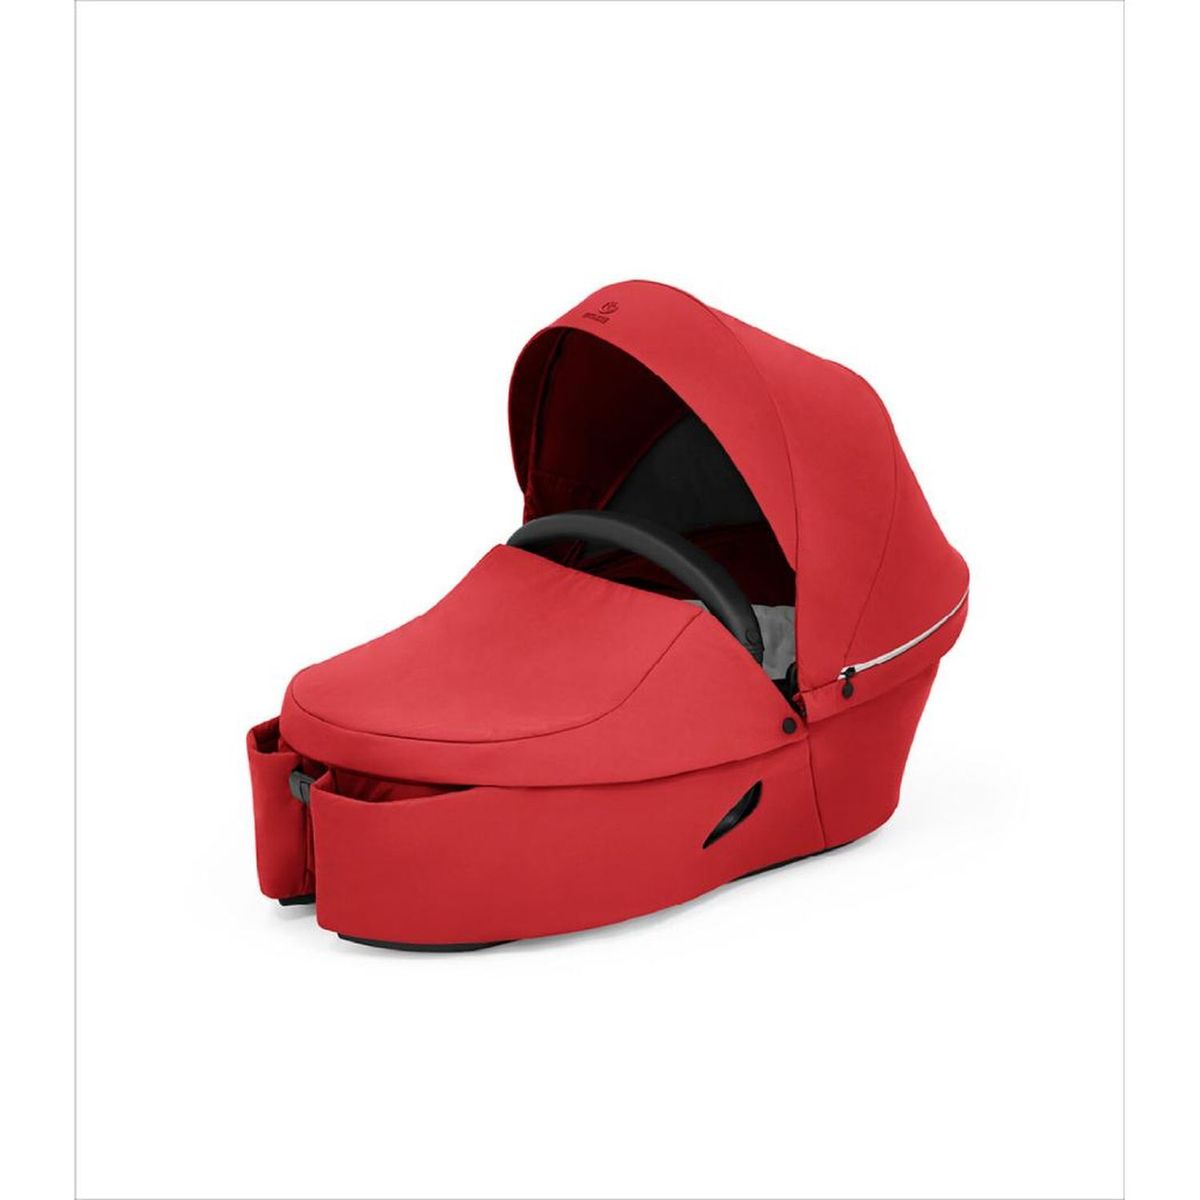 Stokke Xplory X Carry Cot Ruby Red 